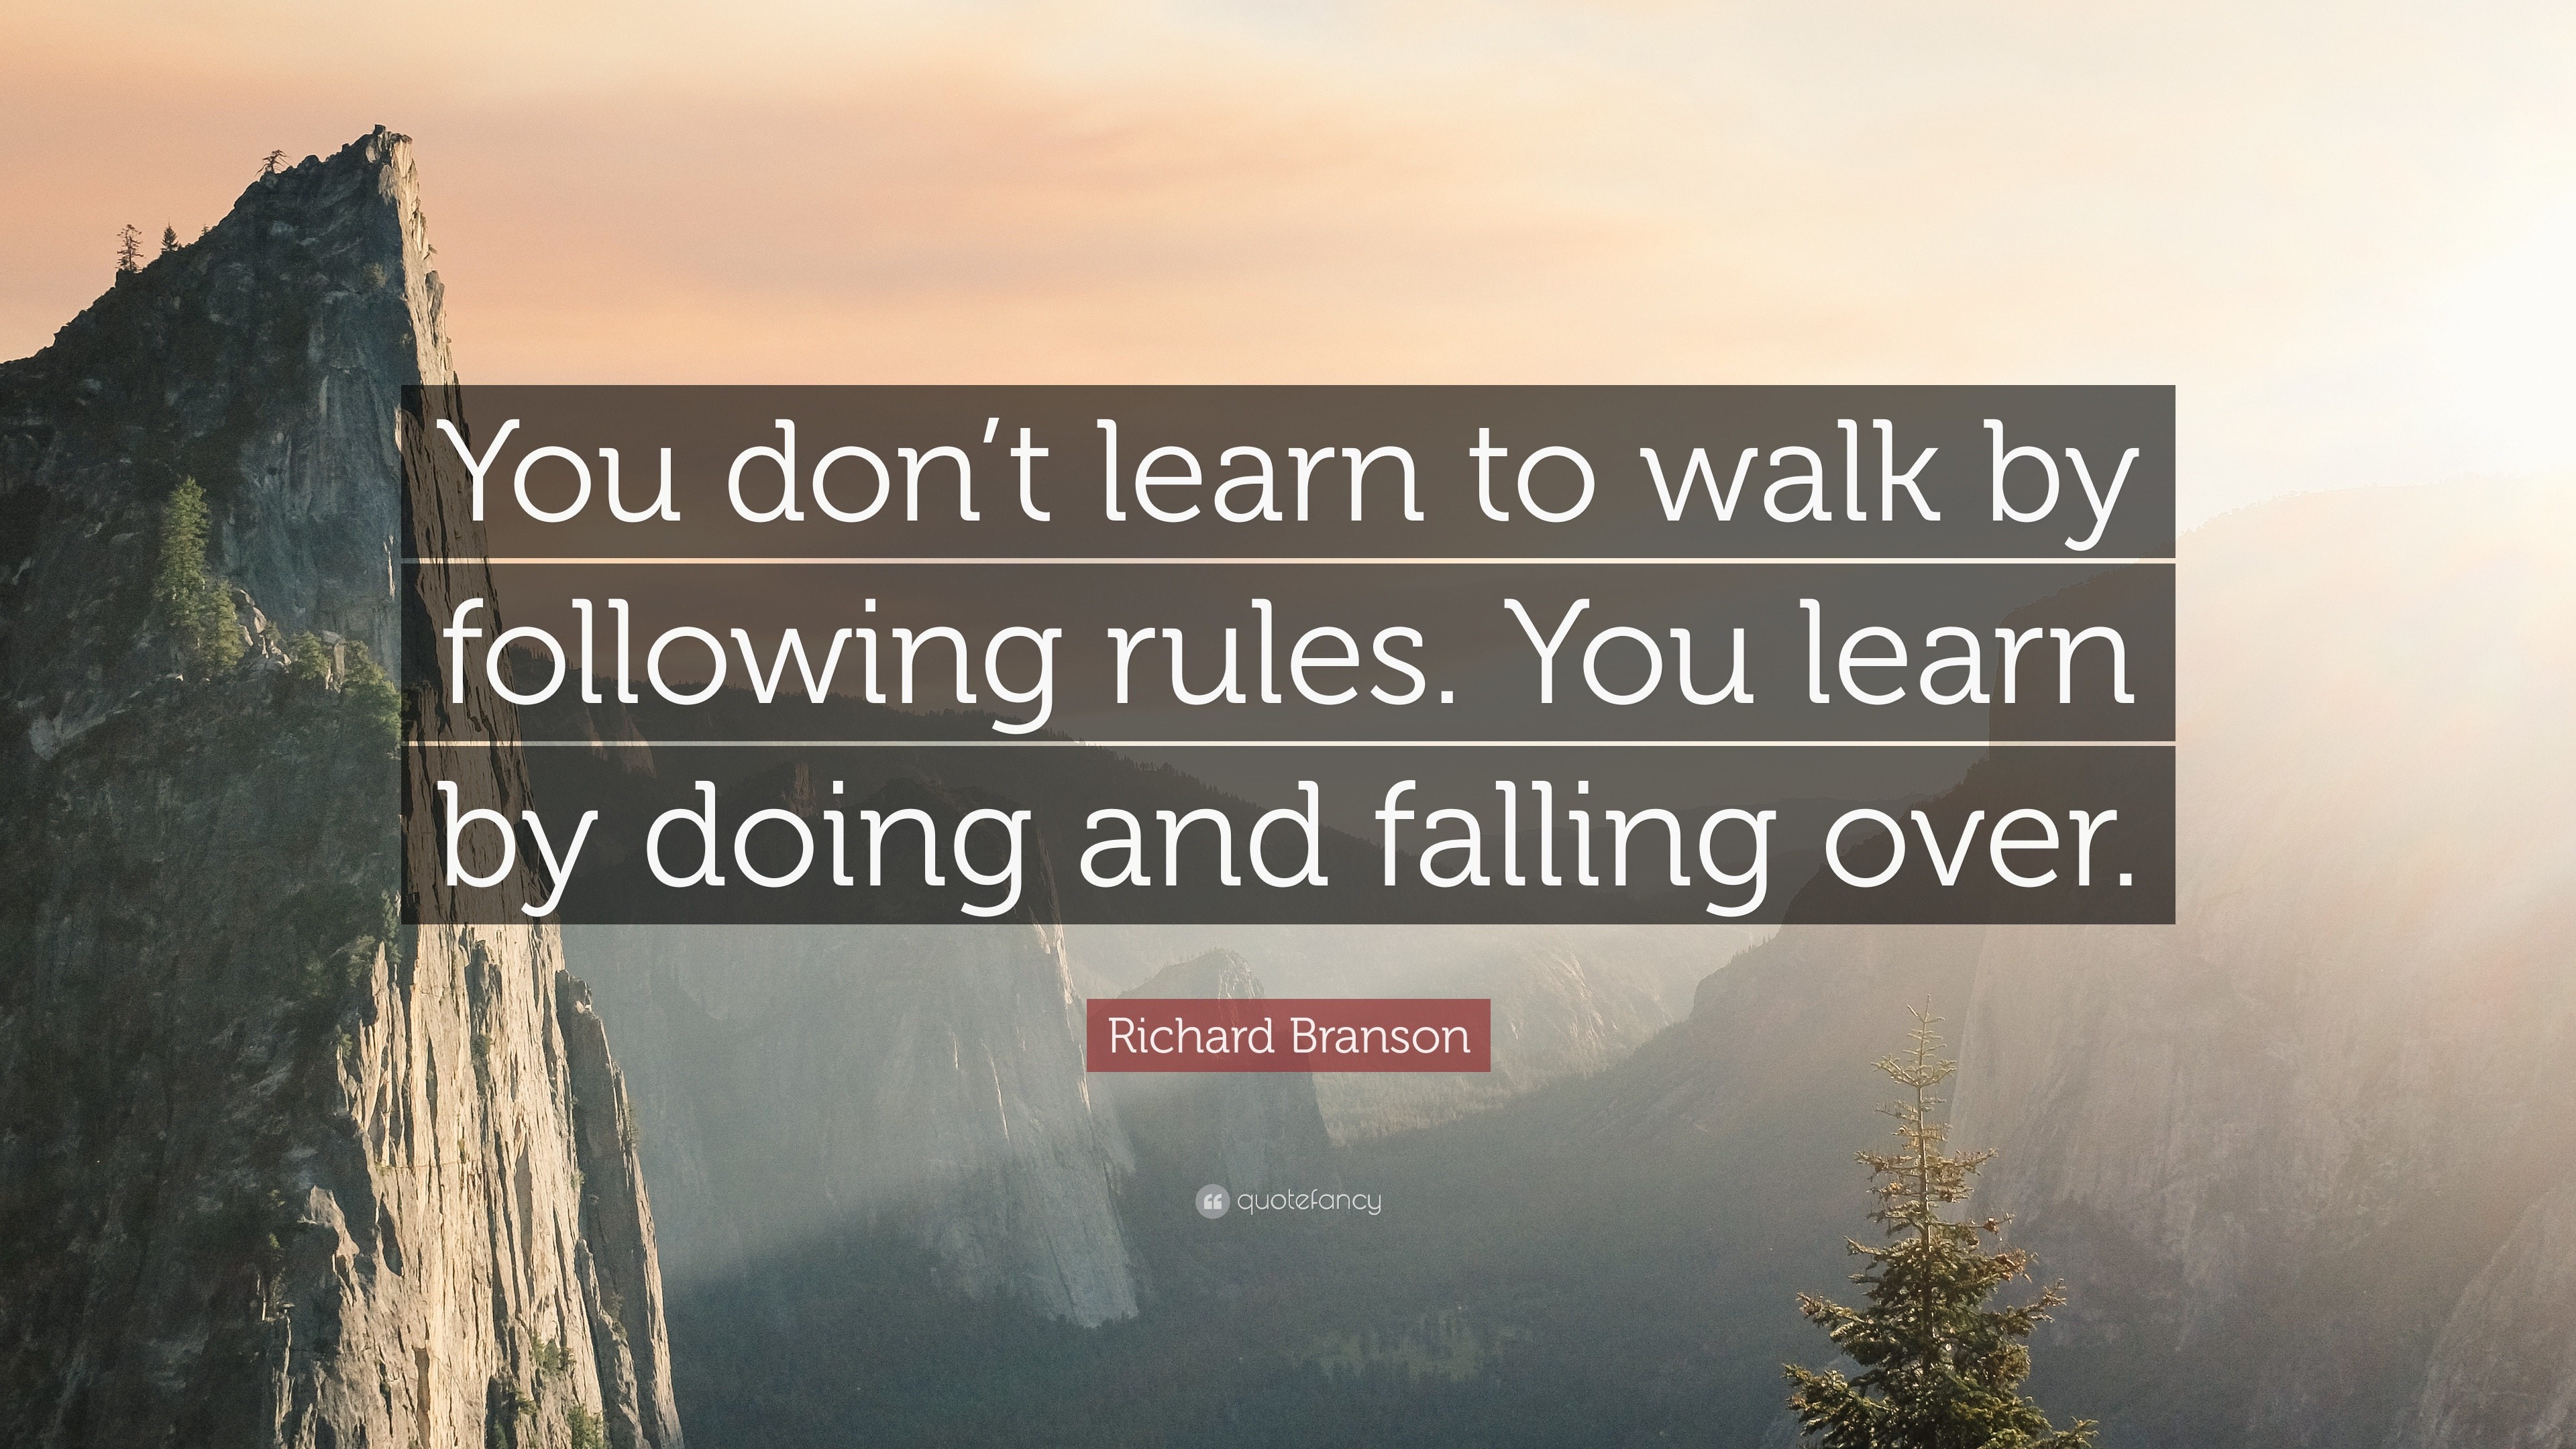 Richard Branson Quote: “You don’t learn to walk by following rules. You